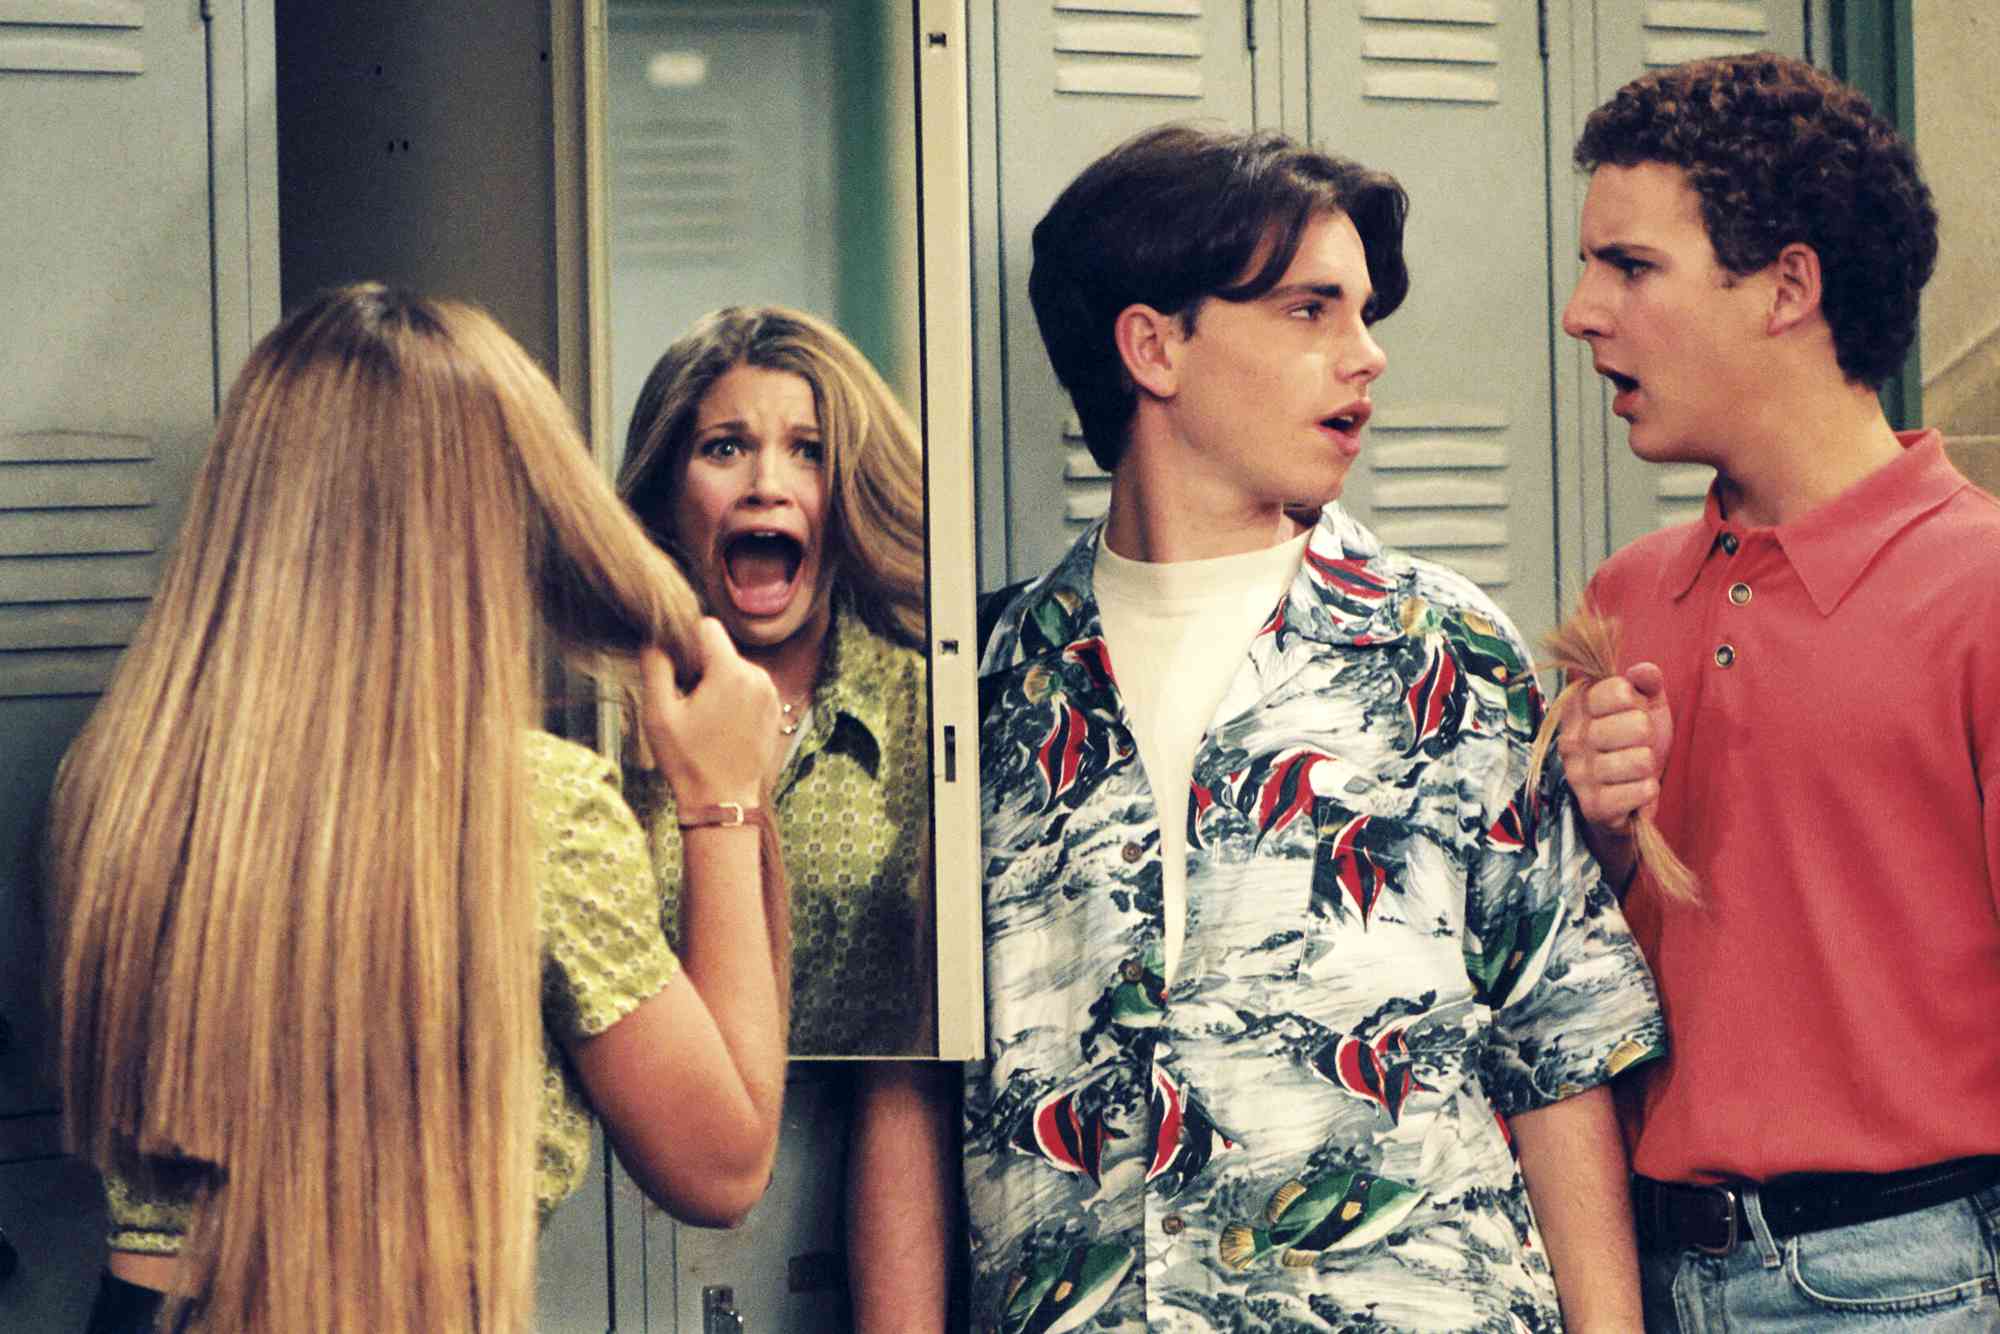 Danielle Fishel Remembers Cutting Her Own Hair on an Episode of “Boy Meets World”: 'I Was Thrilled'